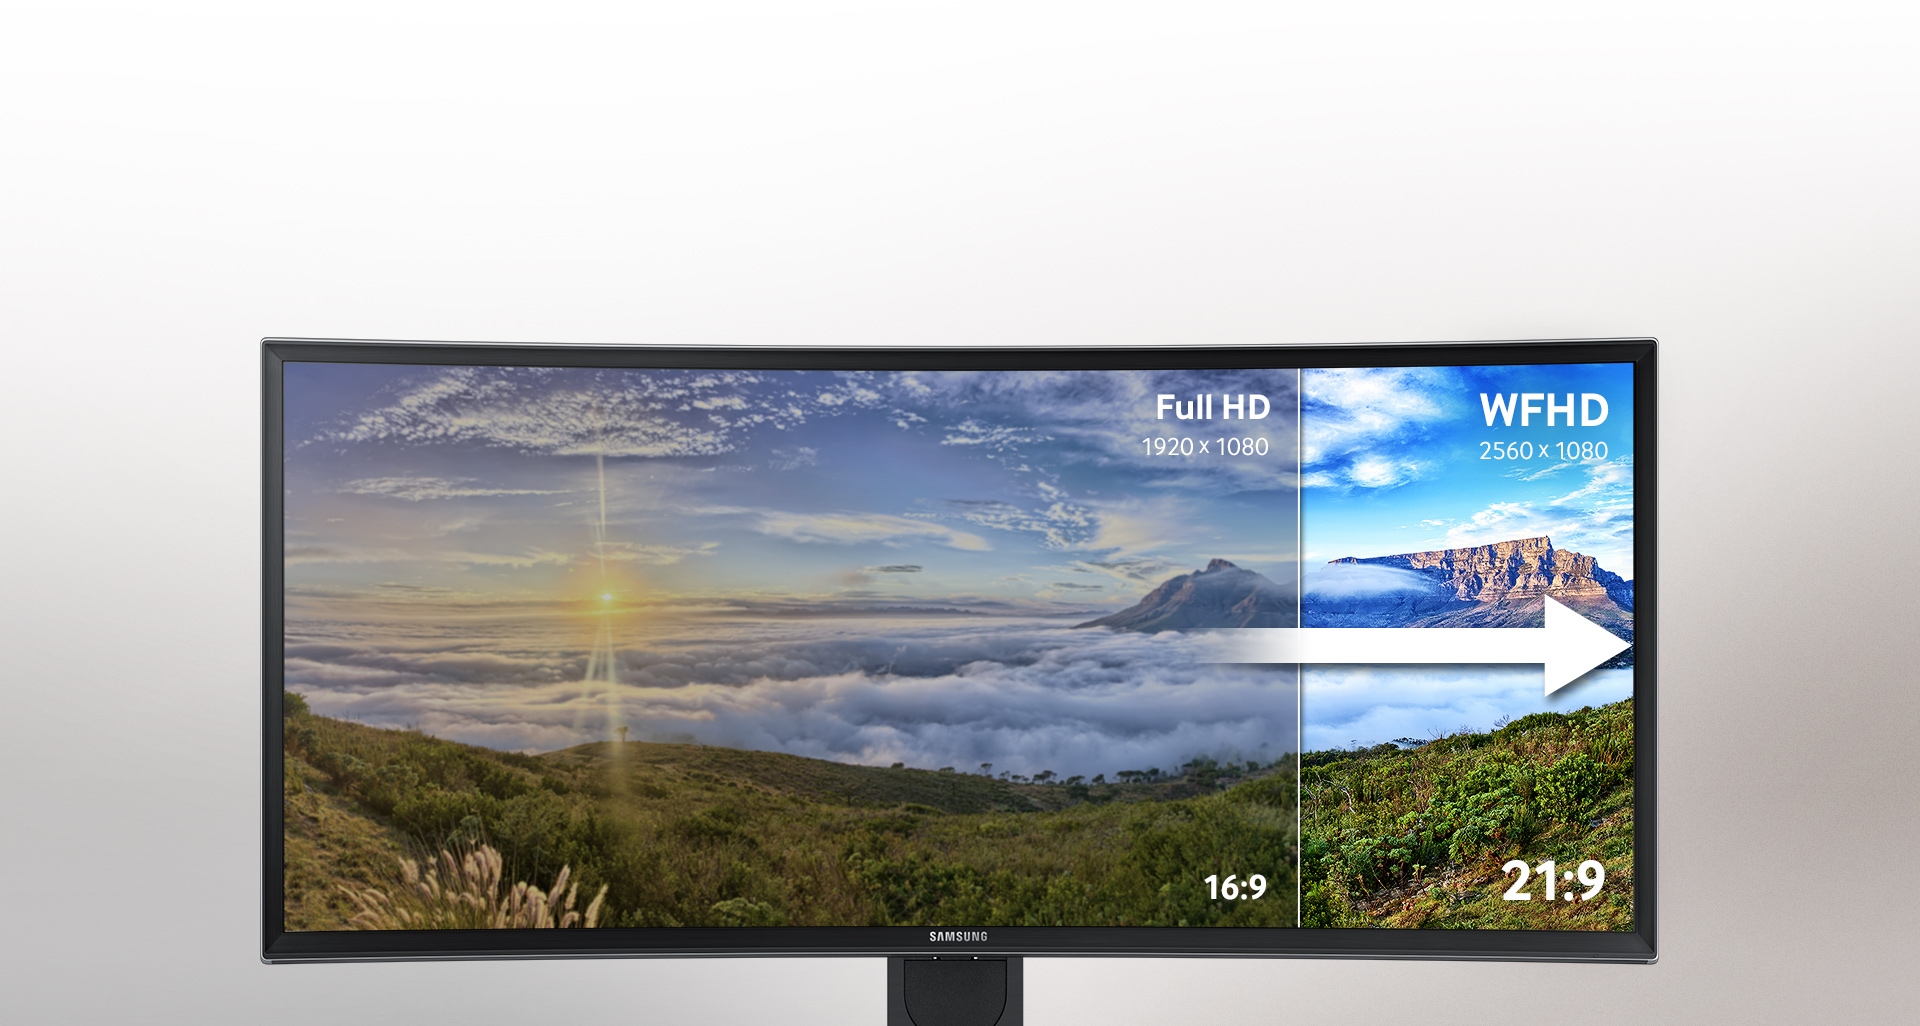 Experience wide panoramic viewing with vibrant picture quality 